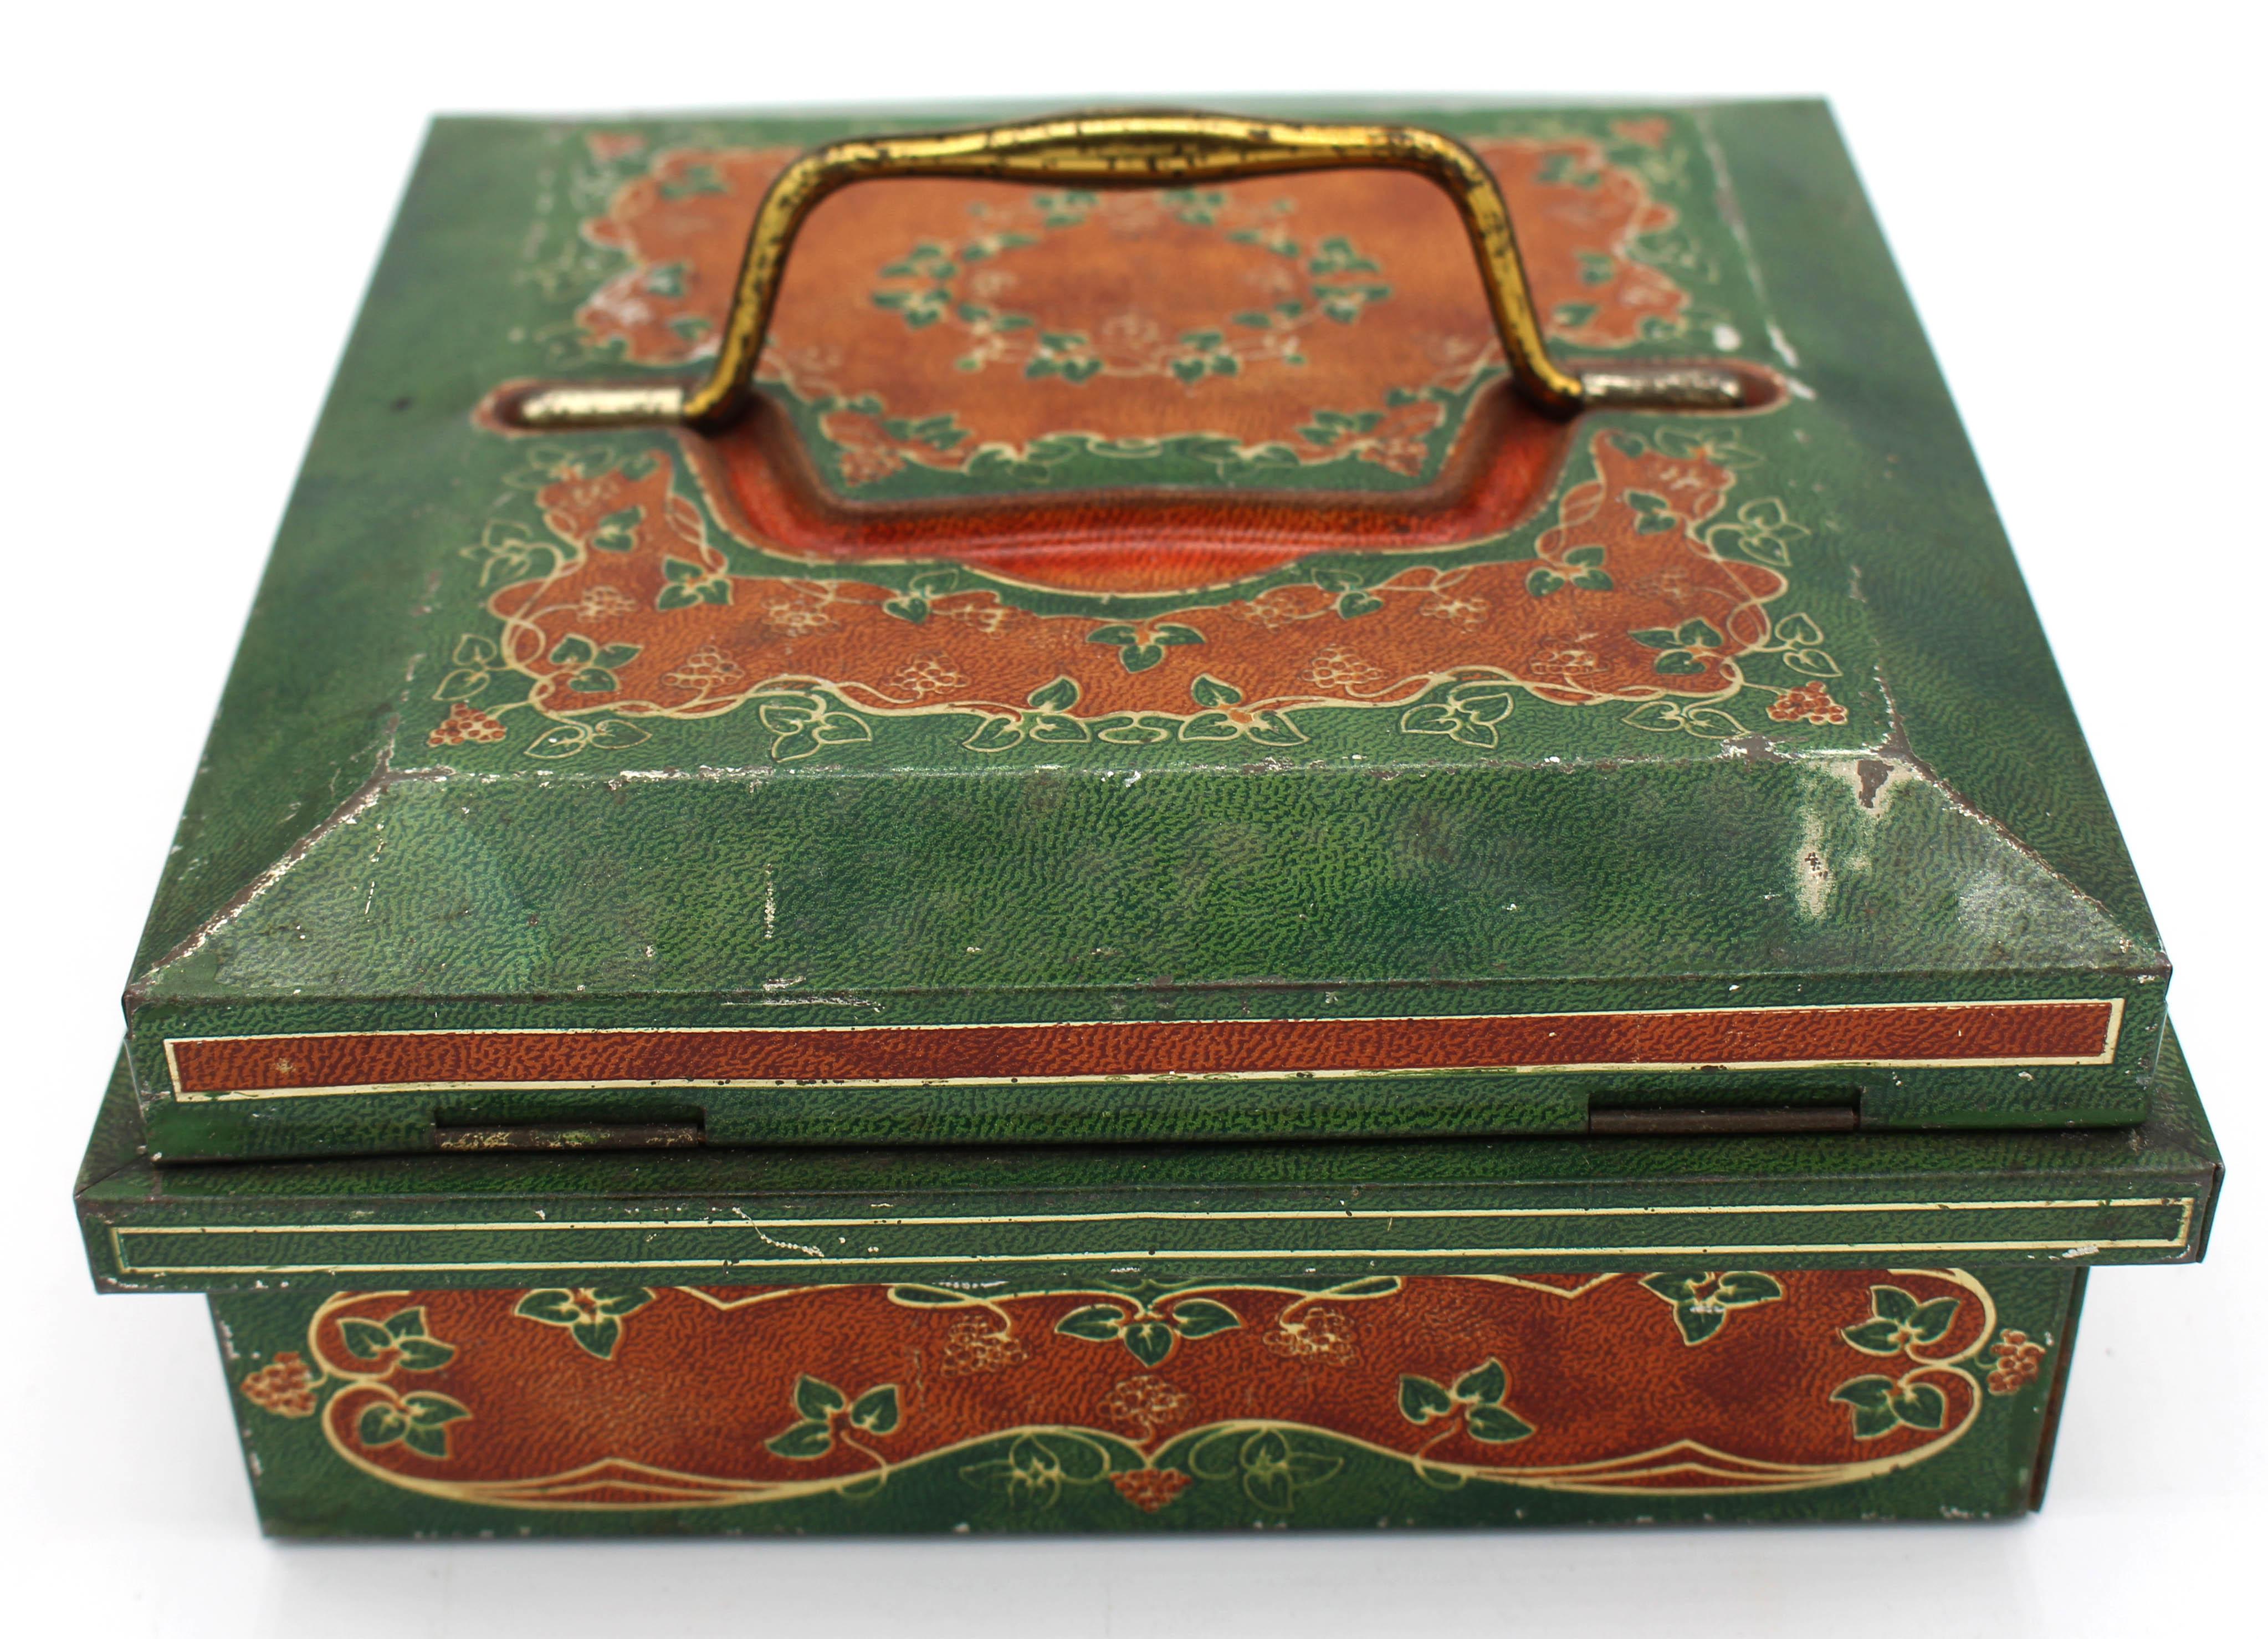 English 1903 Huntley & Palmers Jewelry Casket Form Biscuit Tin Box For Sale